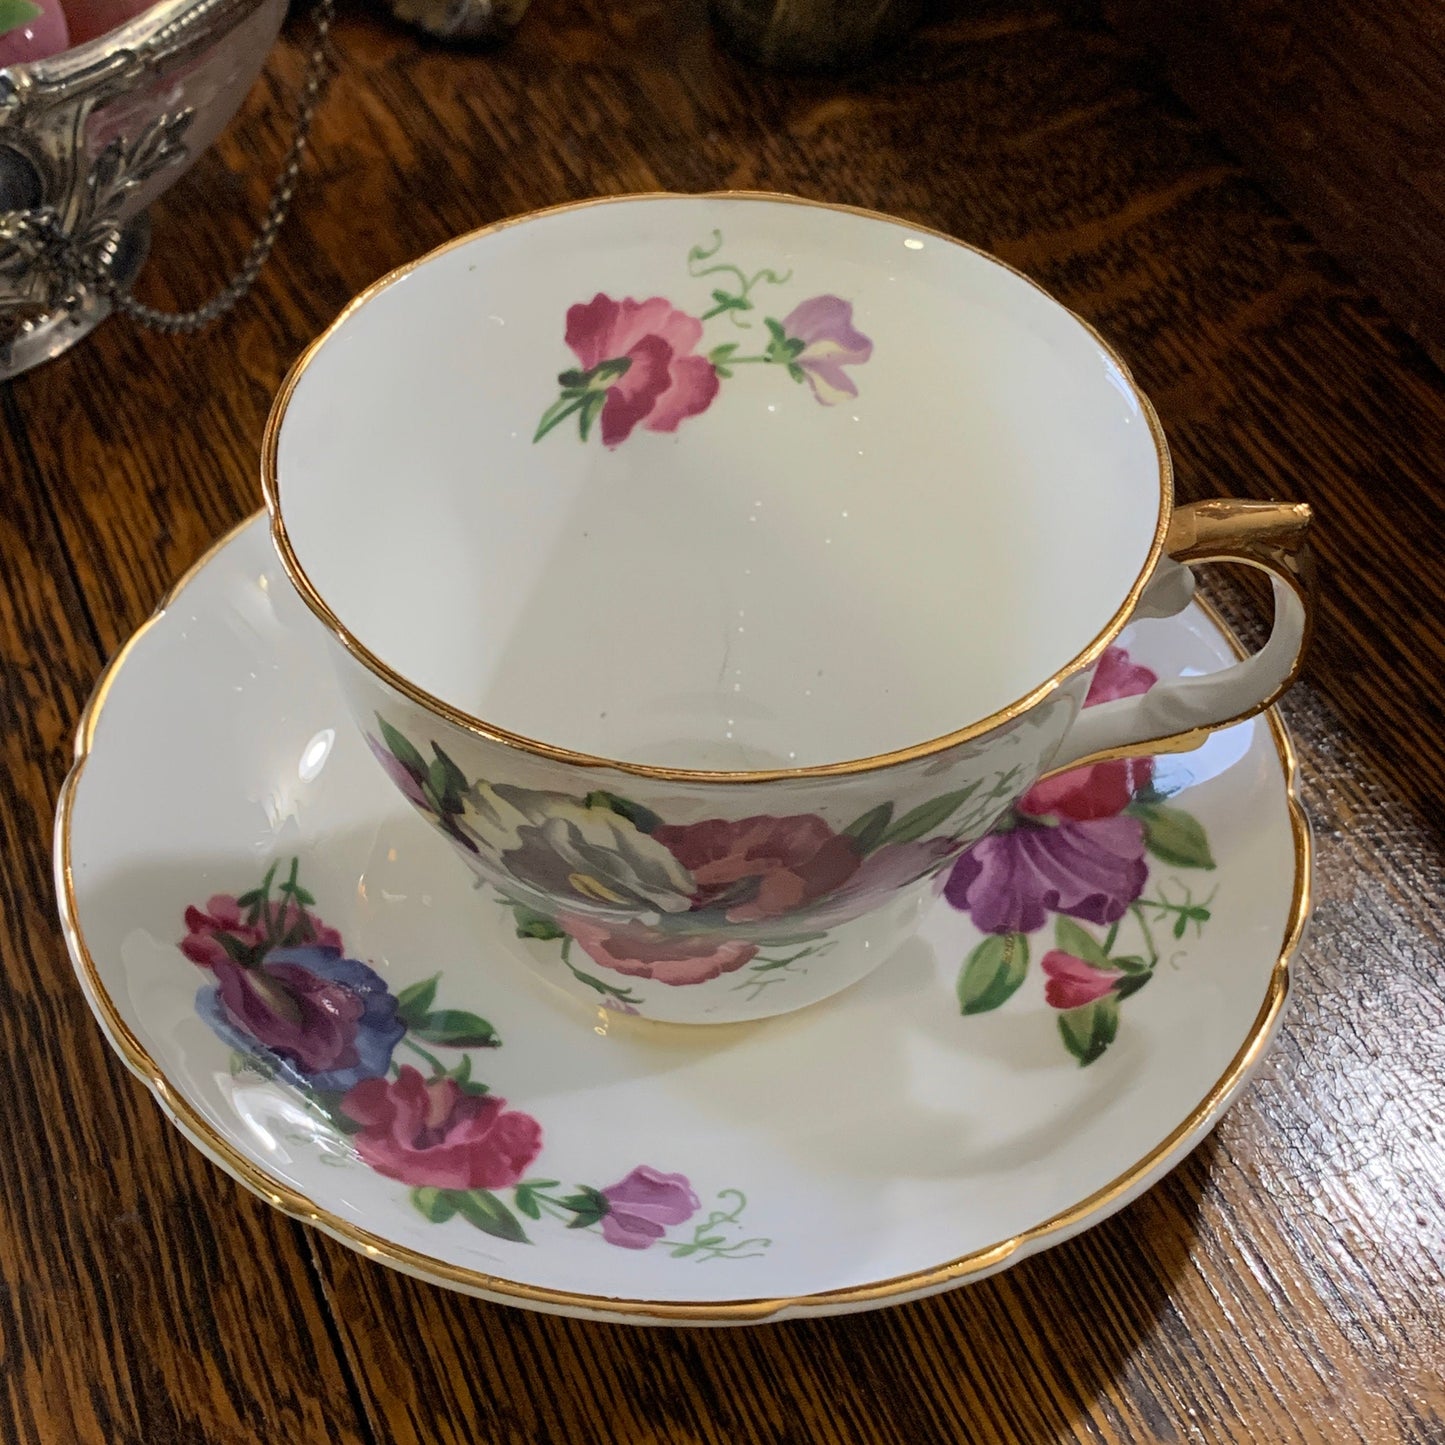 Pink, Purple, and White Floral Vintage Teacup and Saucer by Regency China